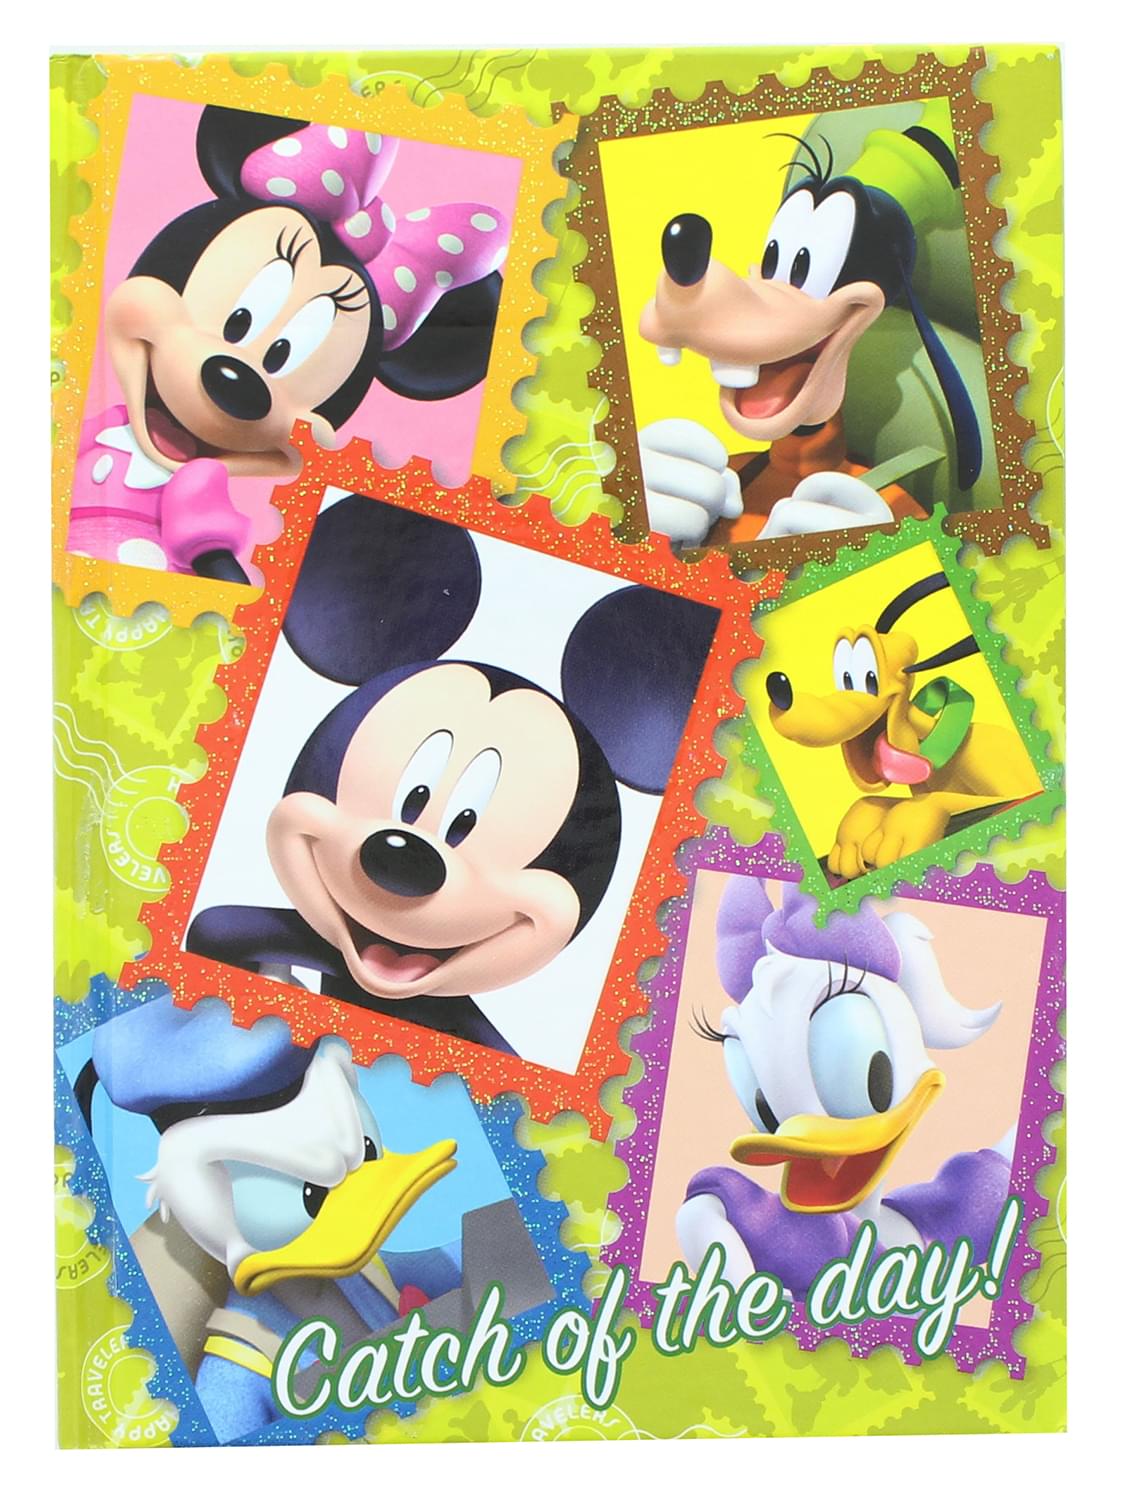 Start your day with Mickey Mouse!